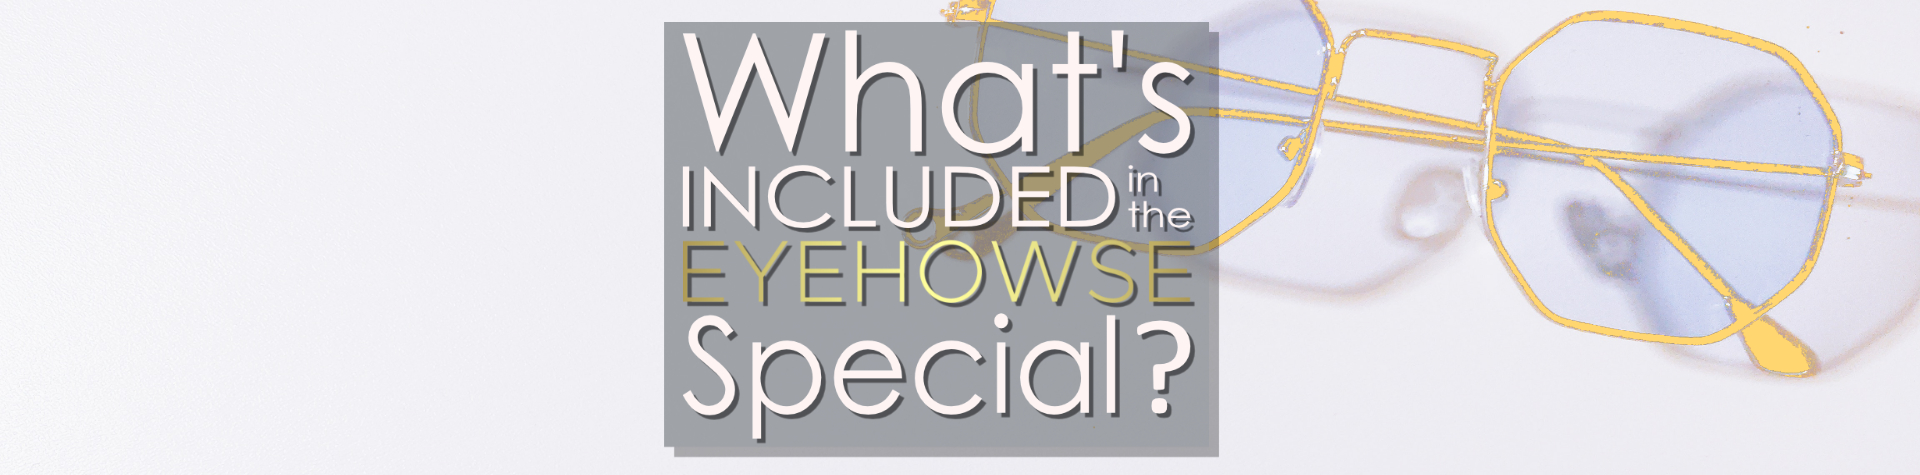 EyeHowse Special